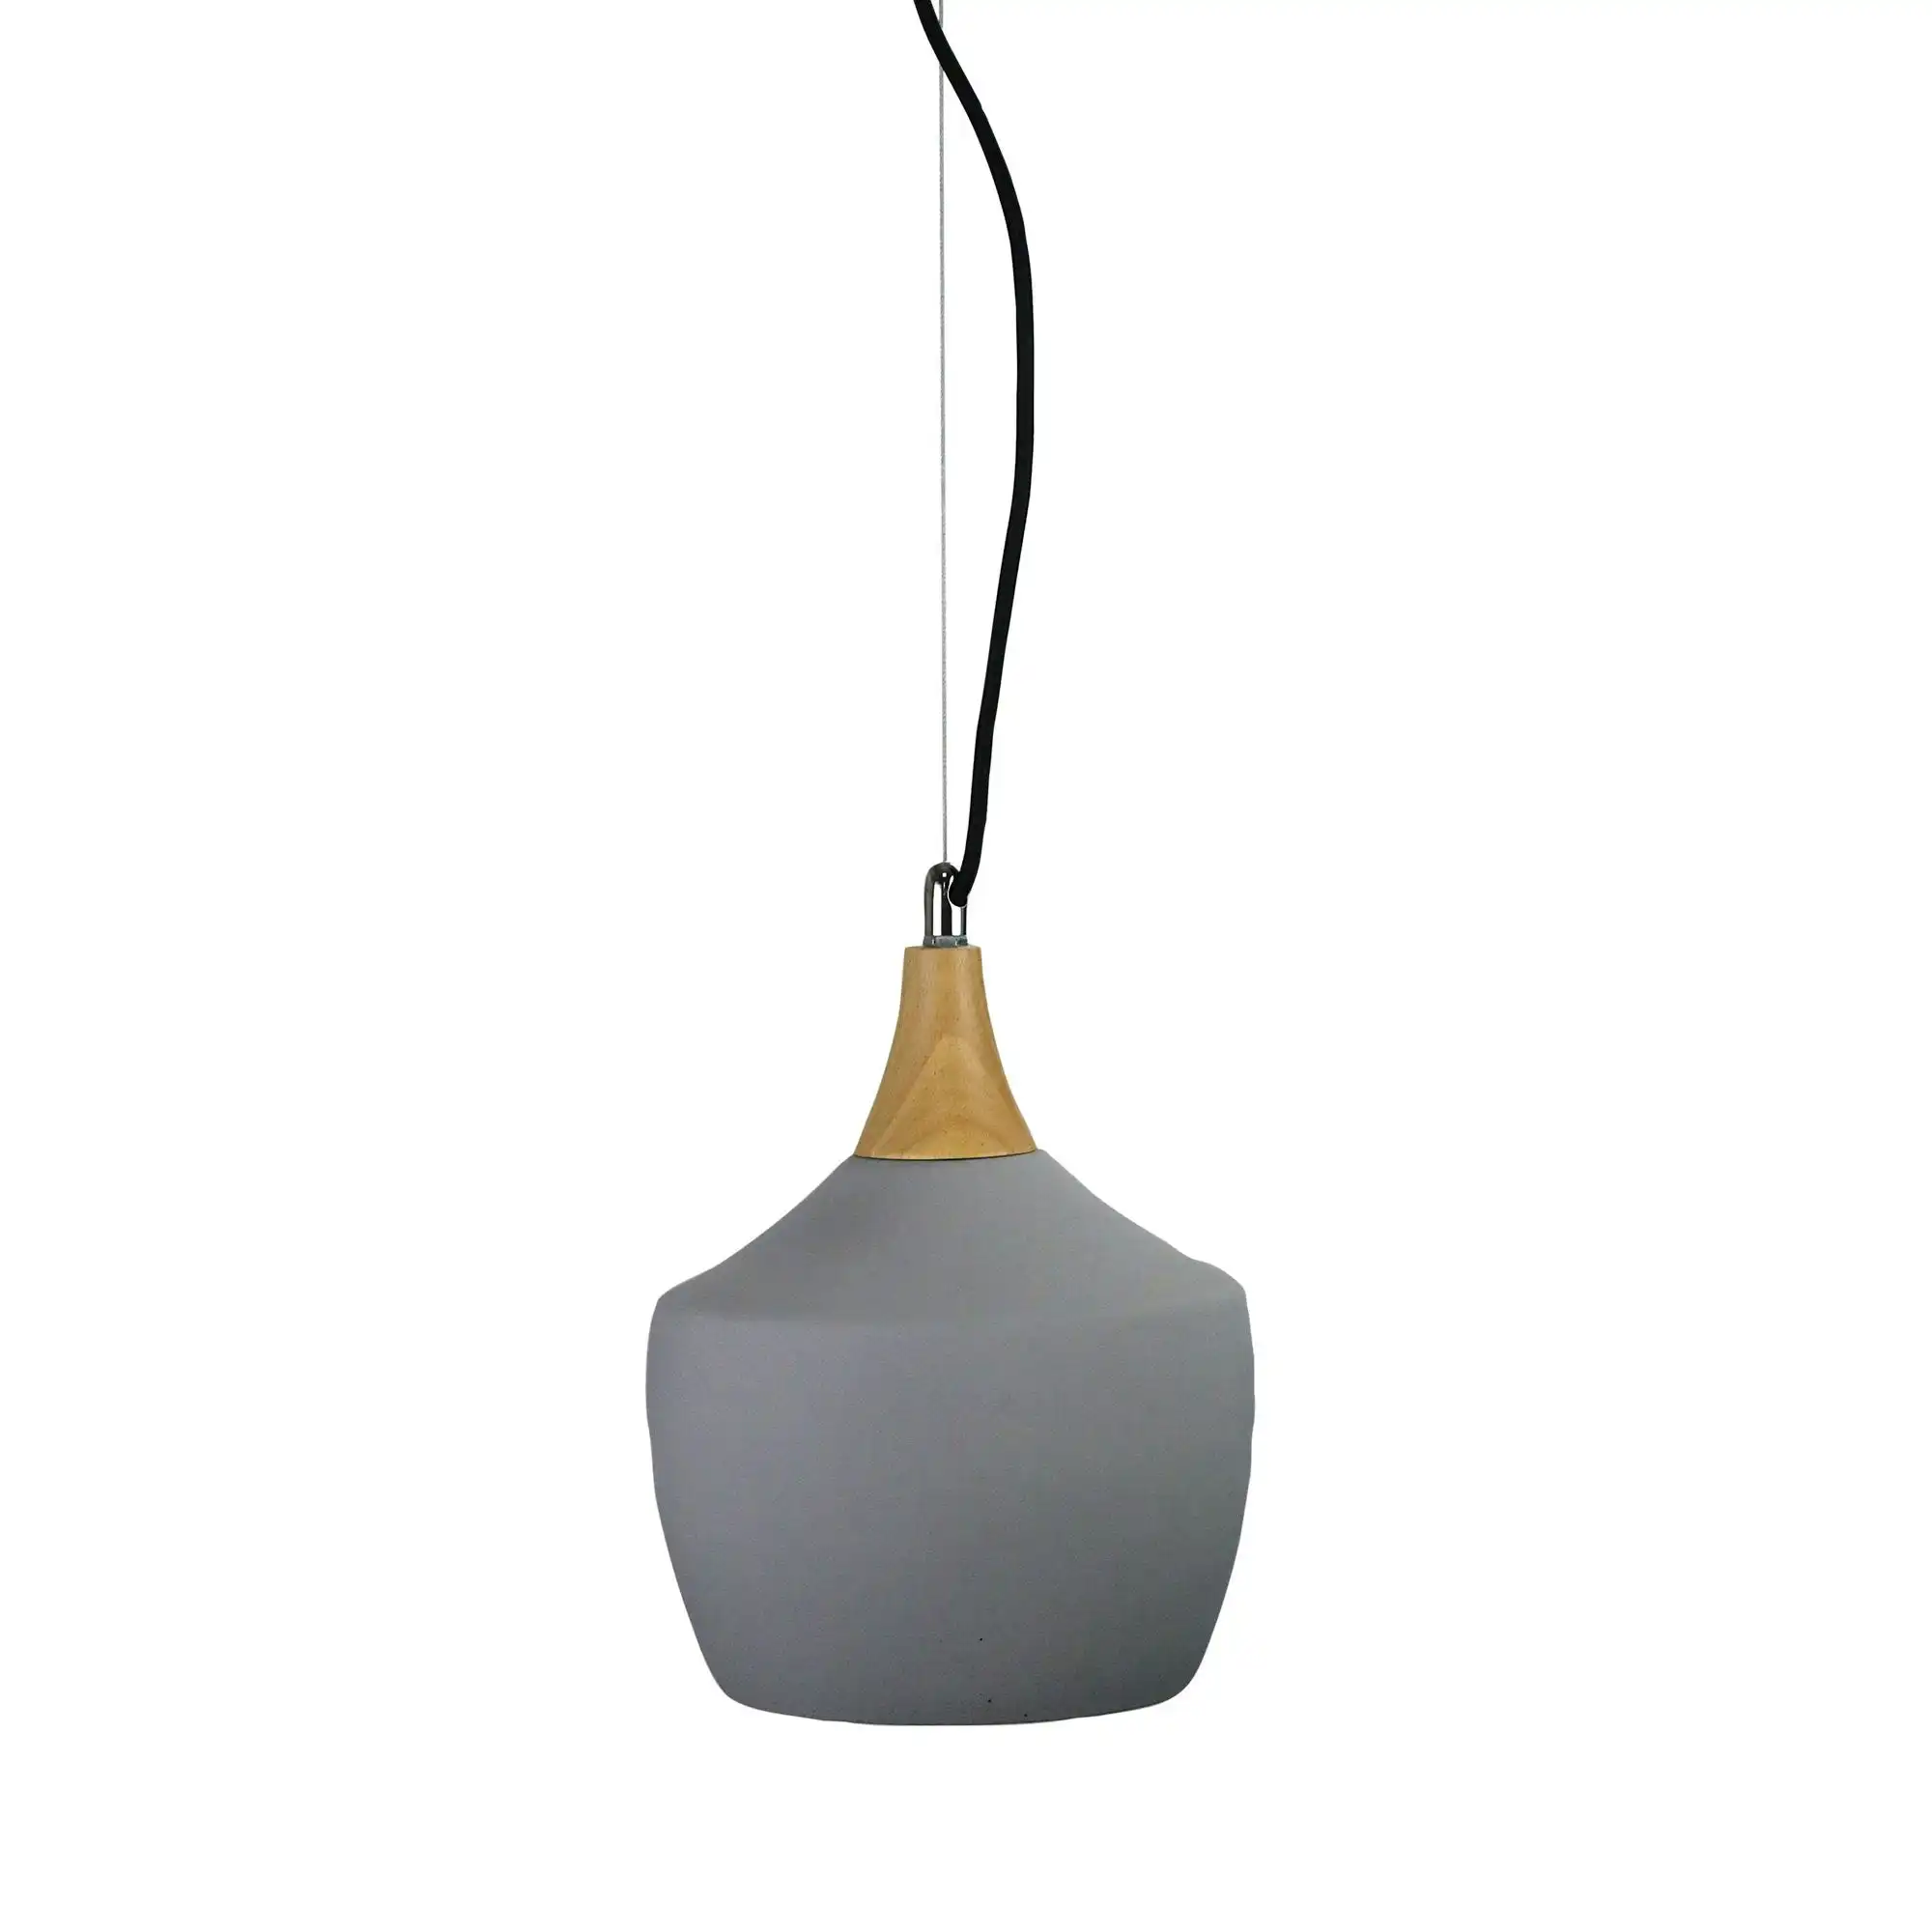 PANTO 3 Urban Style Pendant in Concrete and Timber